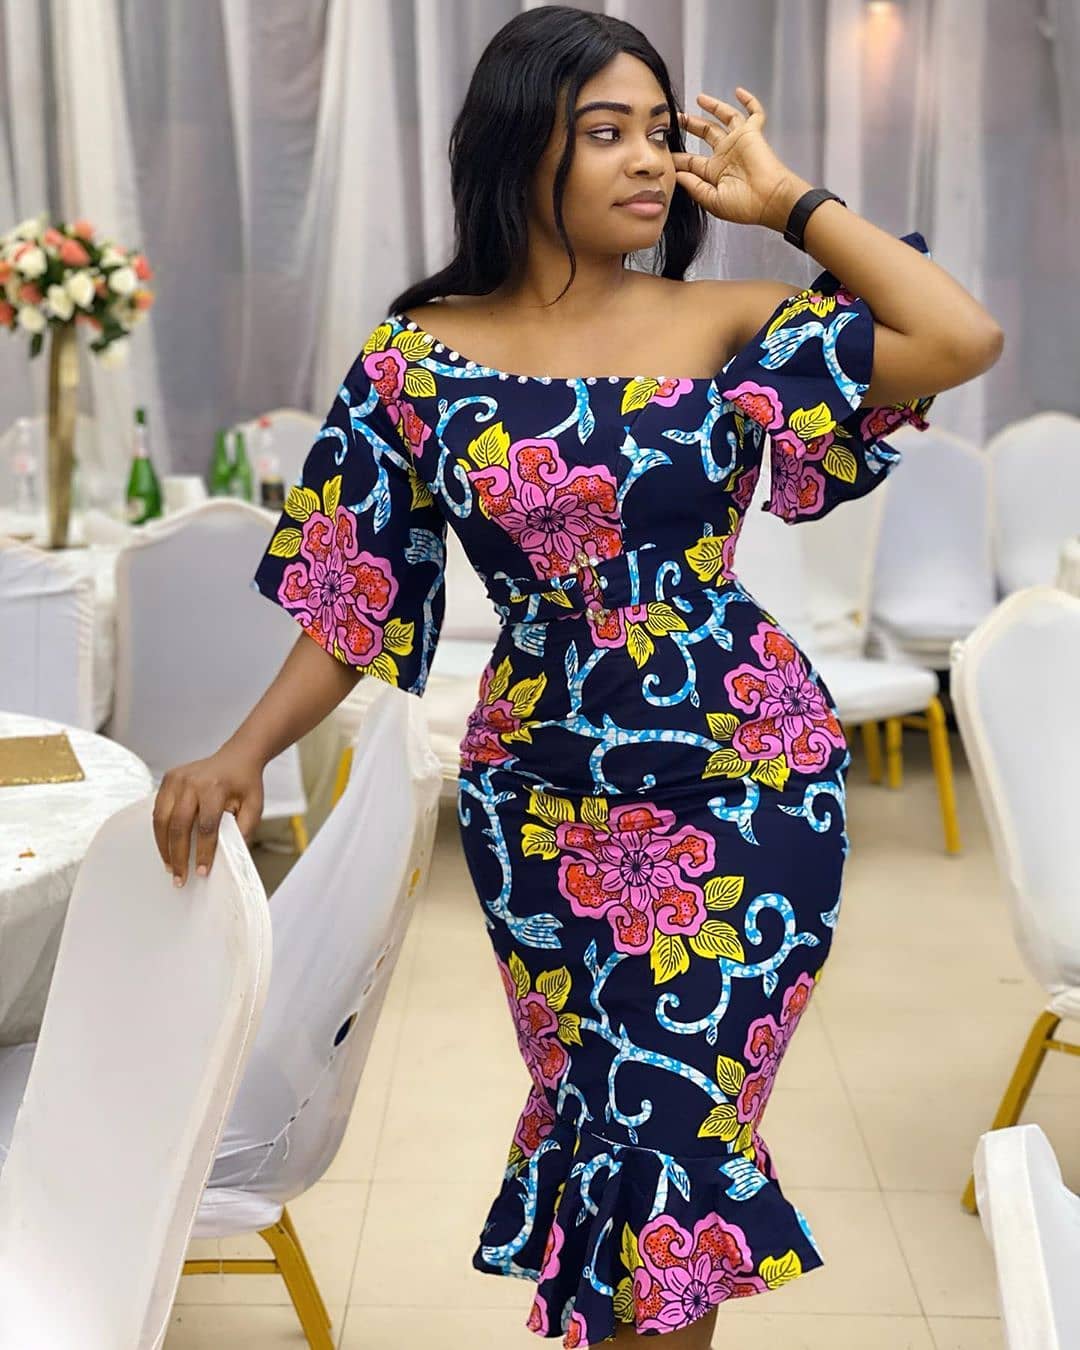 African Dresses And Styles 2020: Best African Dresses For Ladies ...